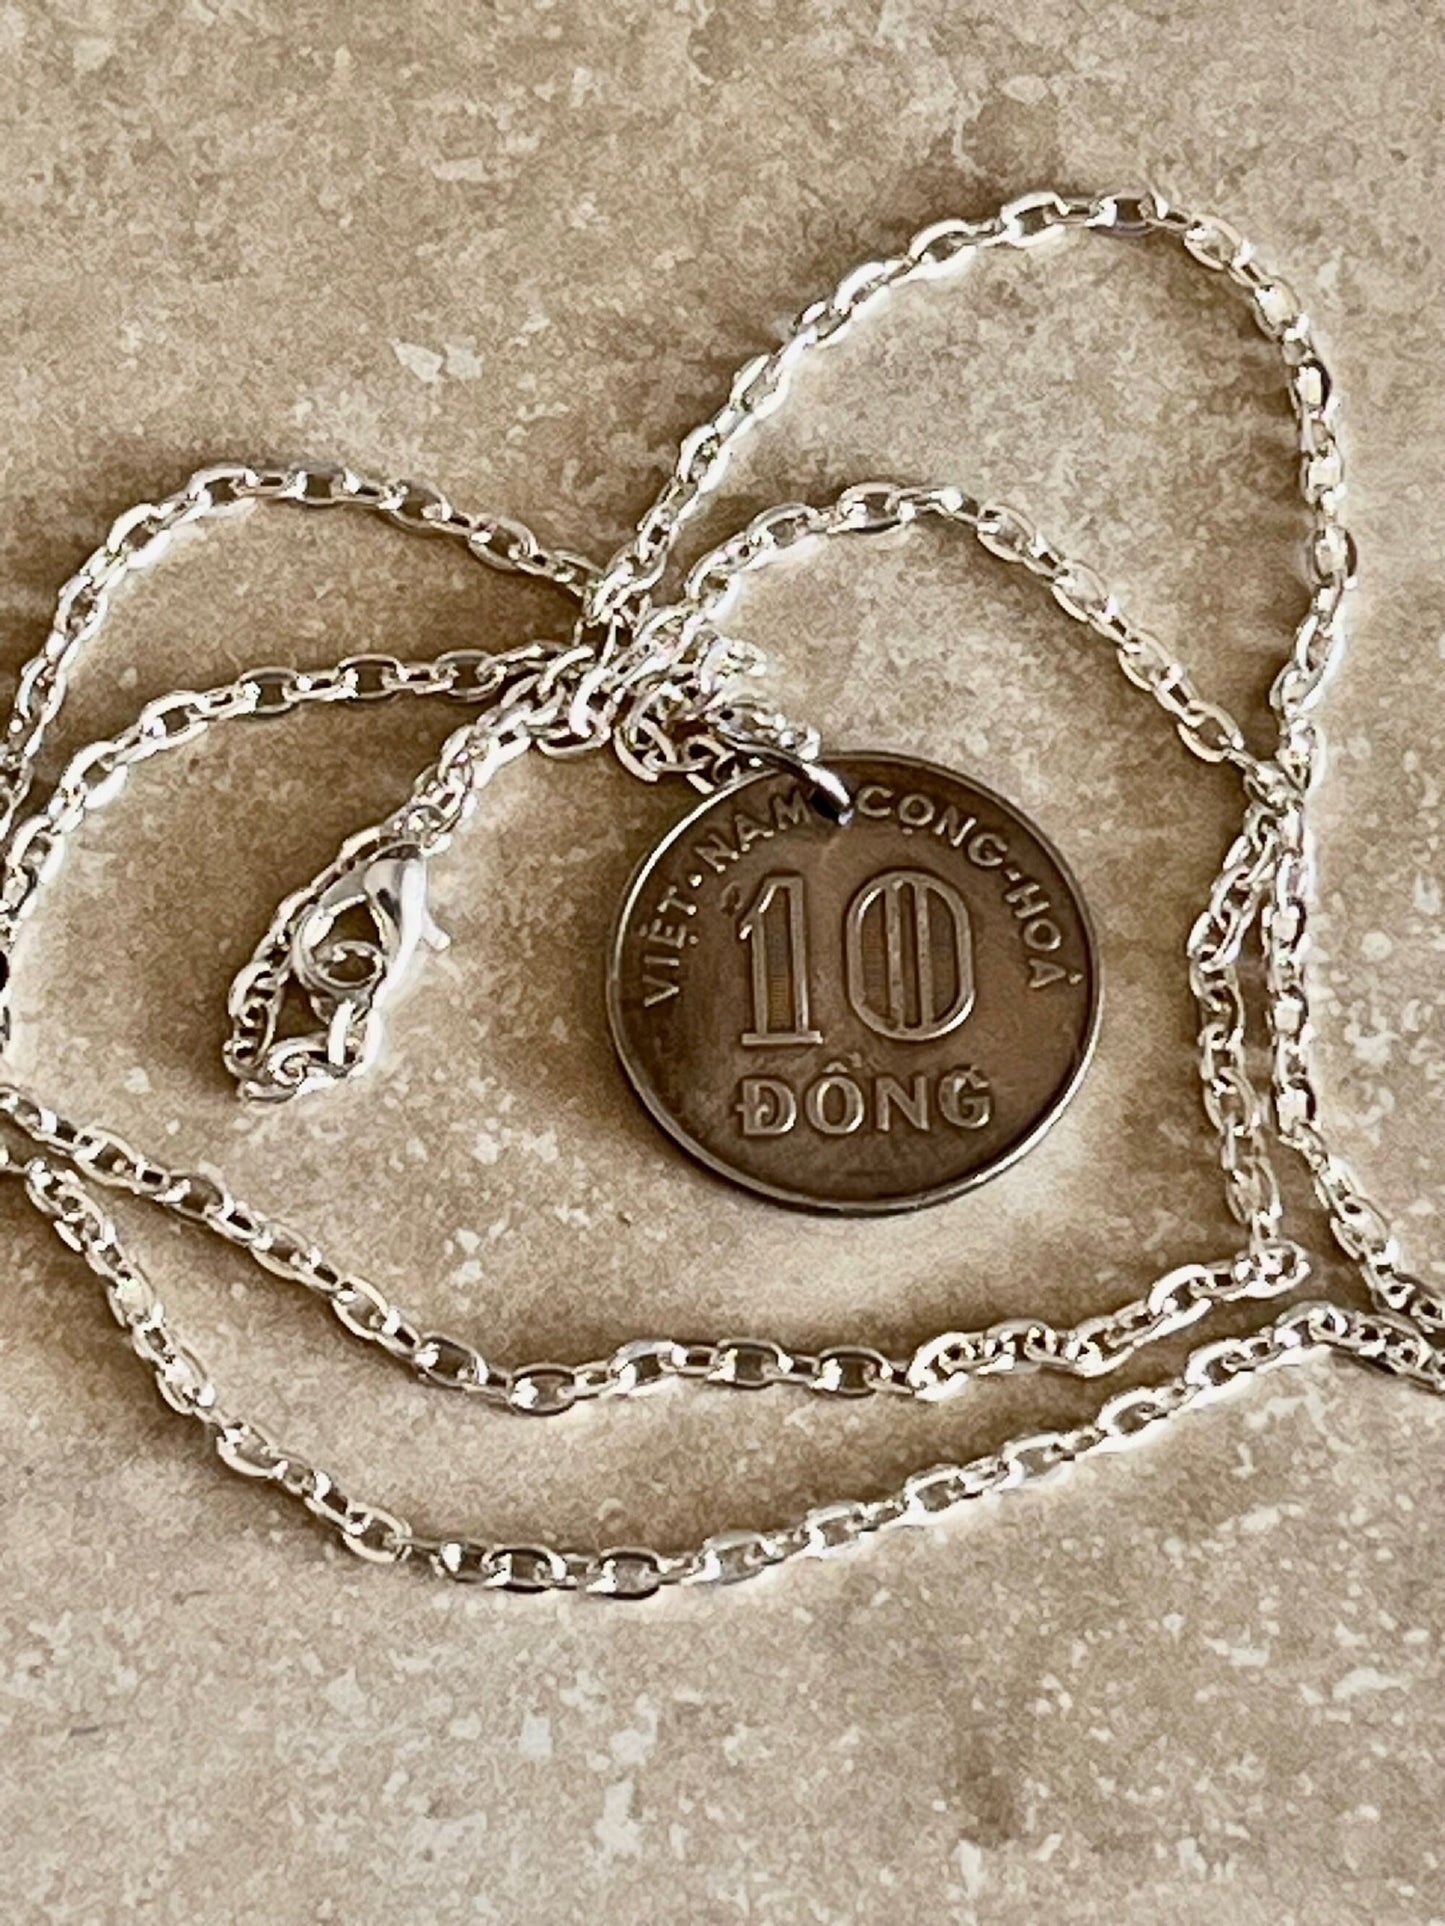 Viet Nam Coin Necklace 10 Dong Coin Hoa Pendant Personal Necklace Old Handmade Jewelry Gift Friend Charm For Him Her World Coin Collector